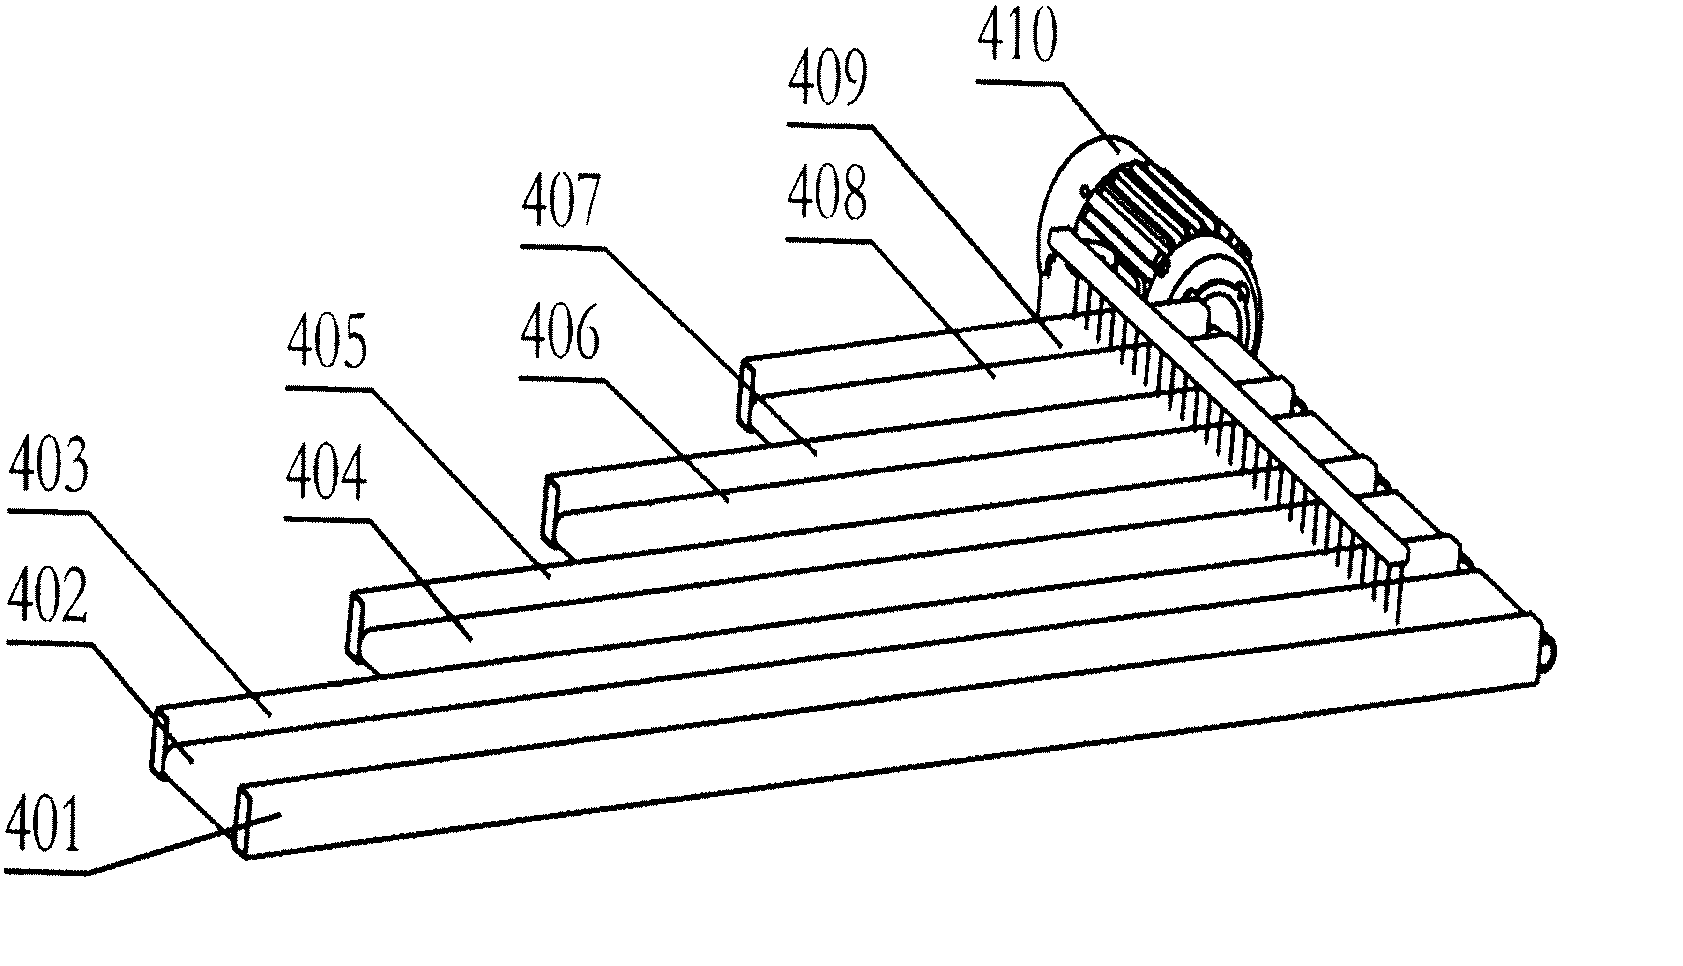 A multi-channel fruit and vegetable sorting machine with uniform feeding and single row sorting device